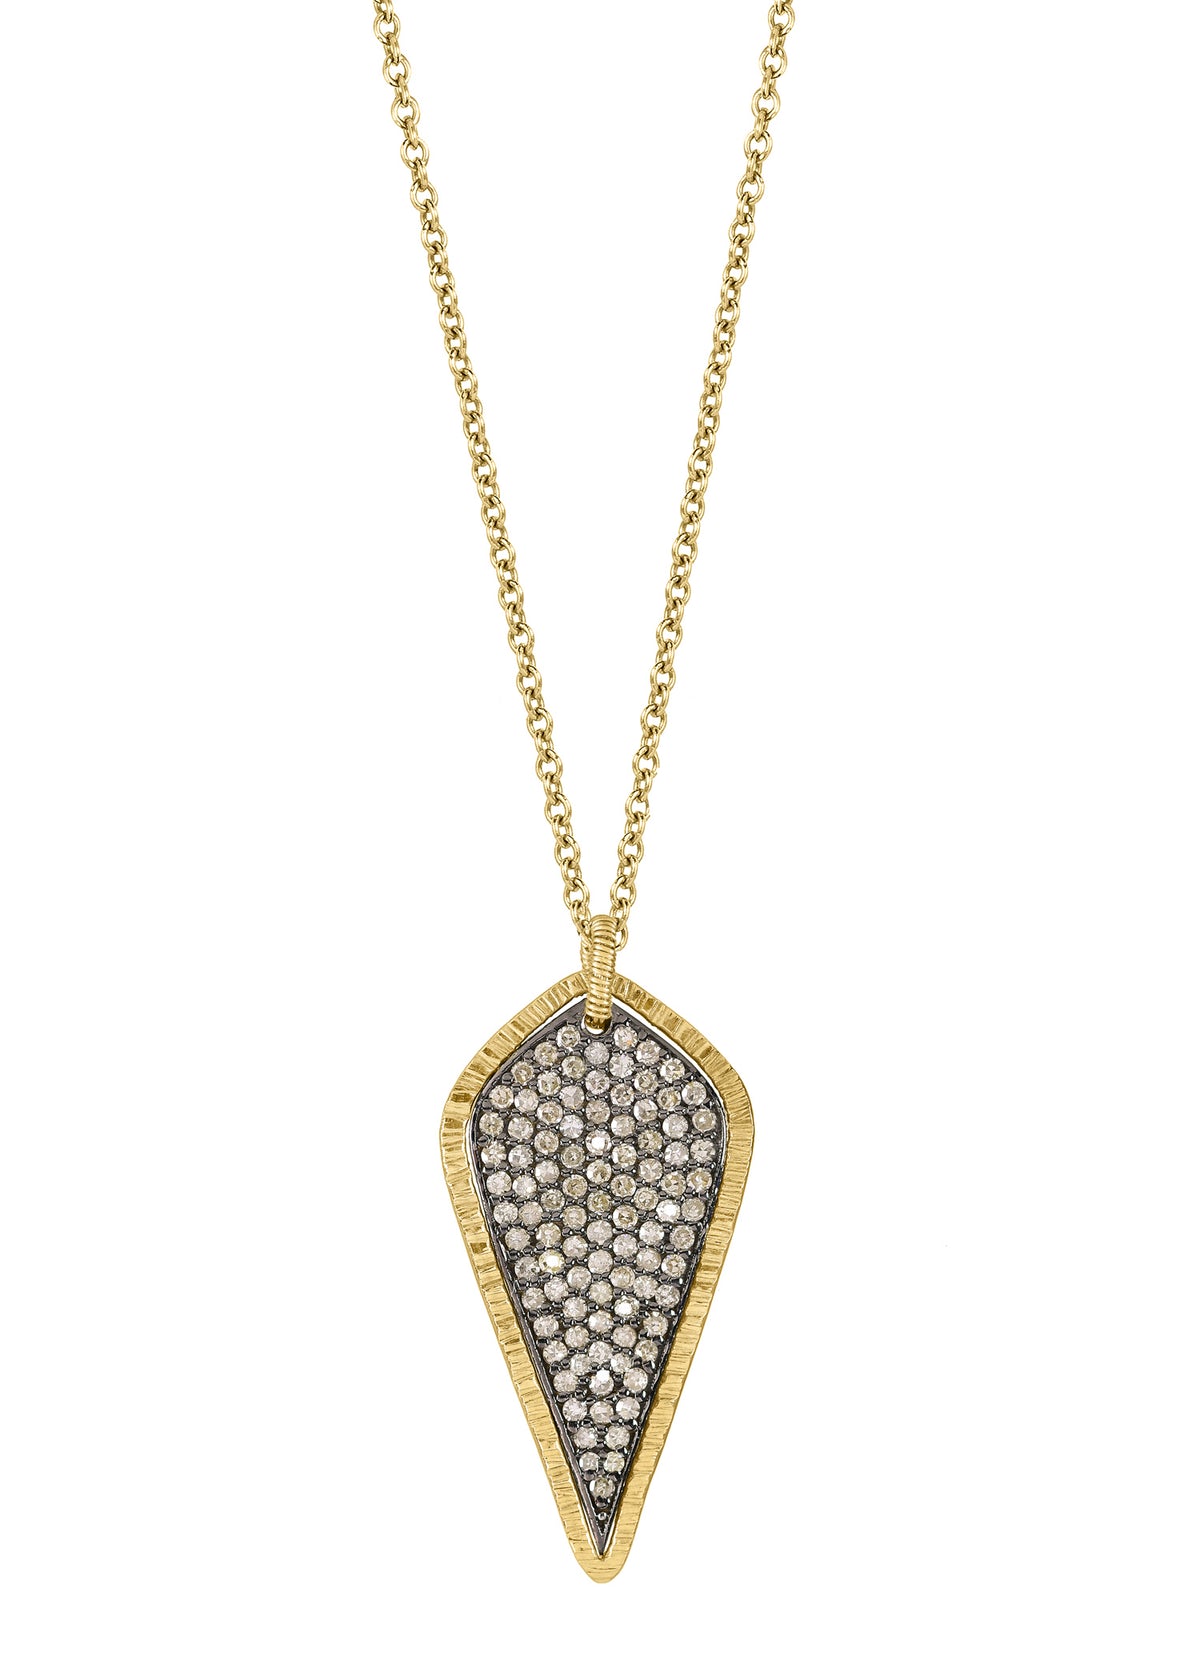 Diamond 14k gold Sterling silver Mixed metal Special order only Necklace measures 17&quot; in length Pendant measures 1-1/16&quot; in length and 9/16&quot; in width at the widest point Handmade in our Los Angeles studio